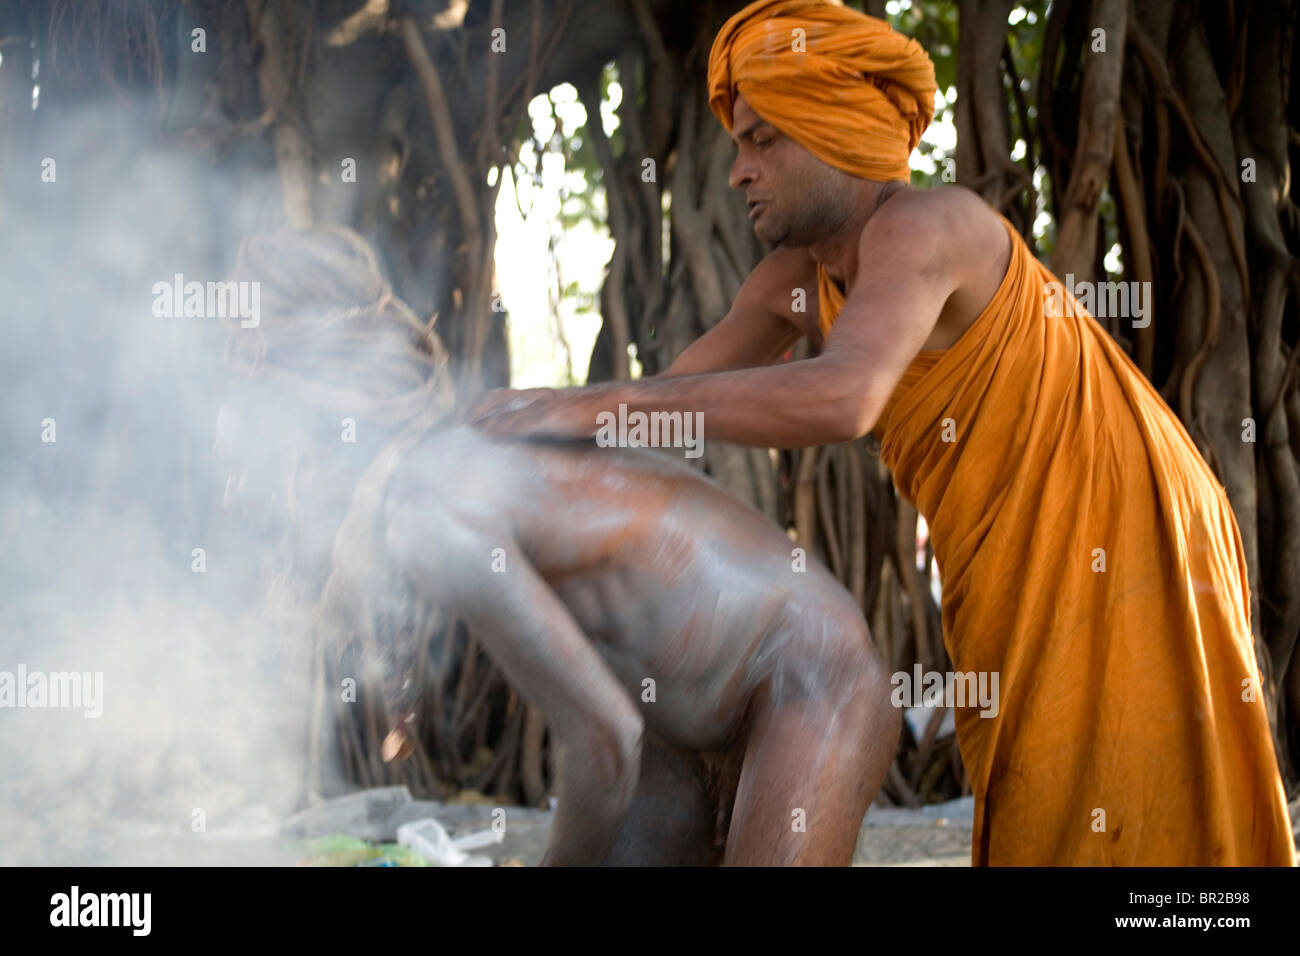 A Sadhu Holy man is helped by his assistant to put ashes on his body for the Kumbh Mela festival Haridwar, Uttarakhand, India. Stock Photo